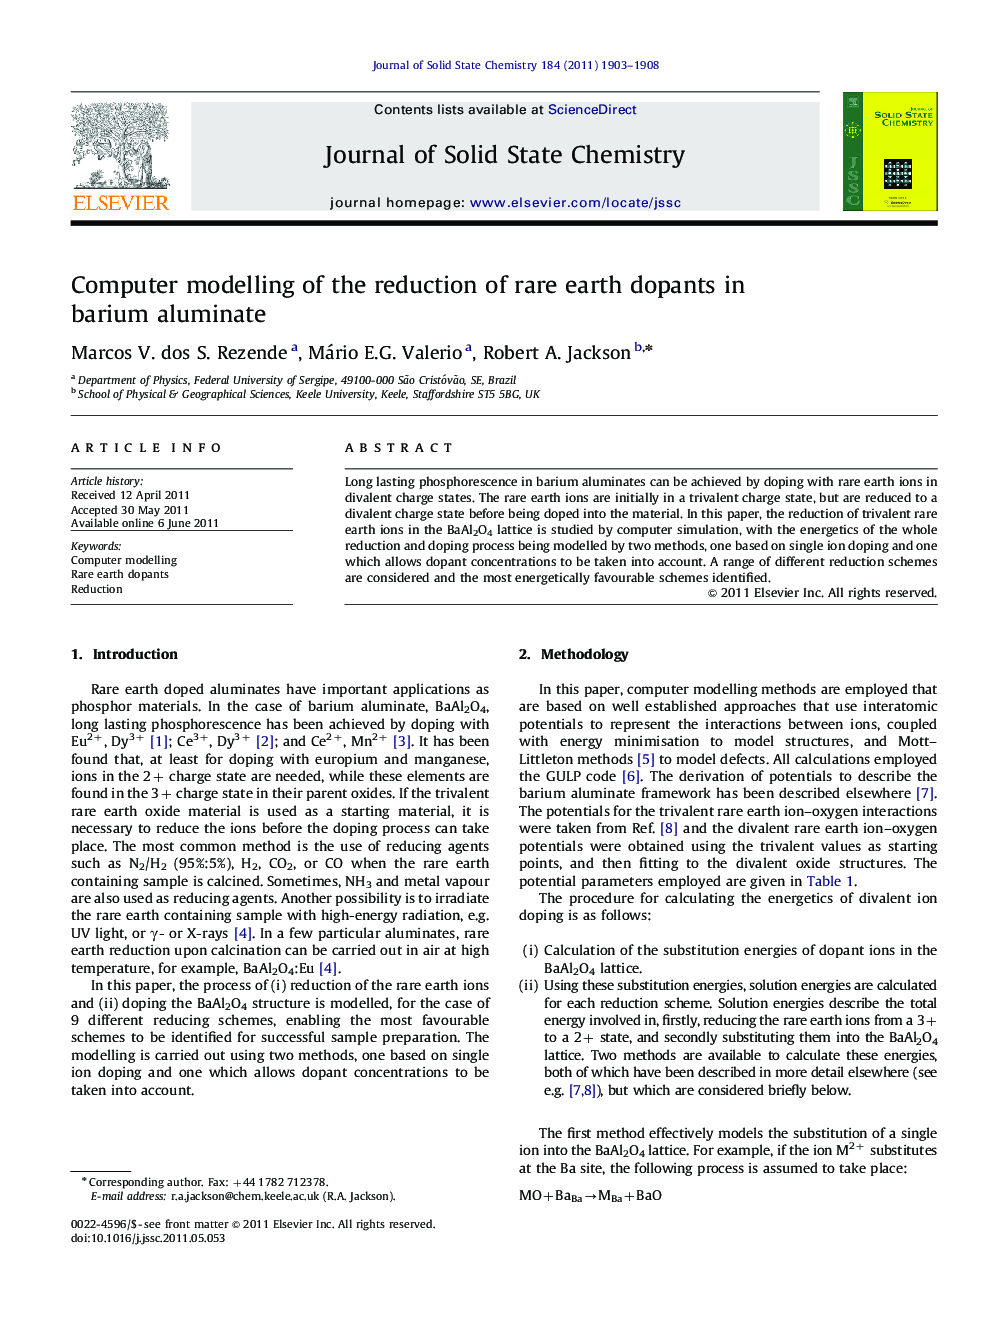 Computer modelling of the reduction of rare earth dopants in barium aluminate